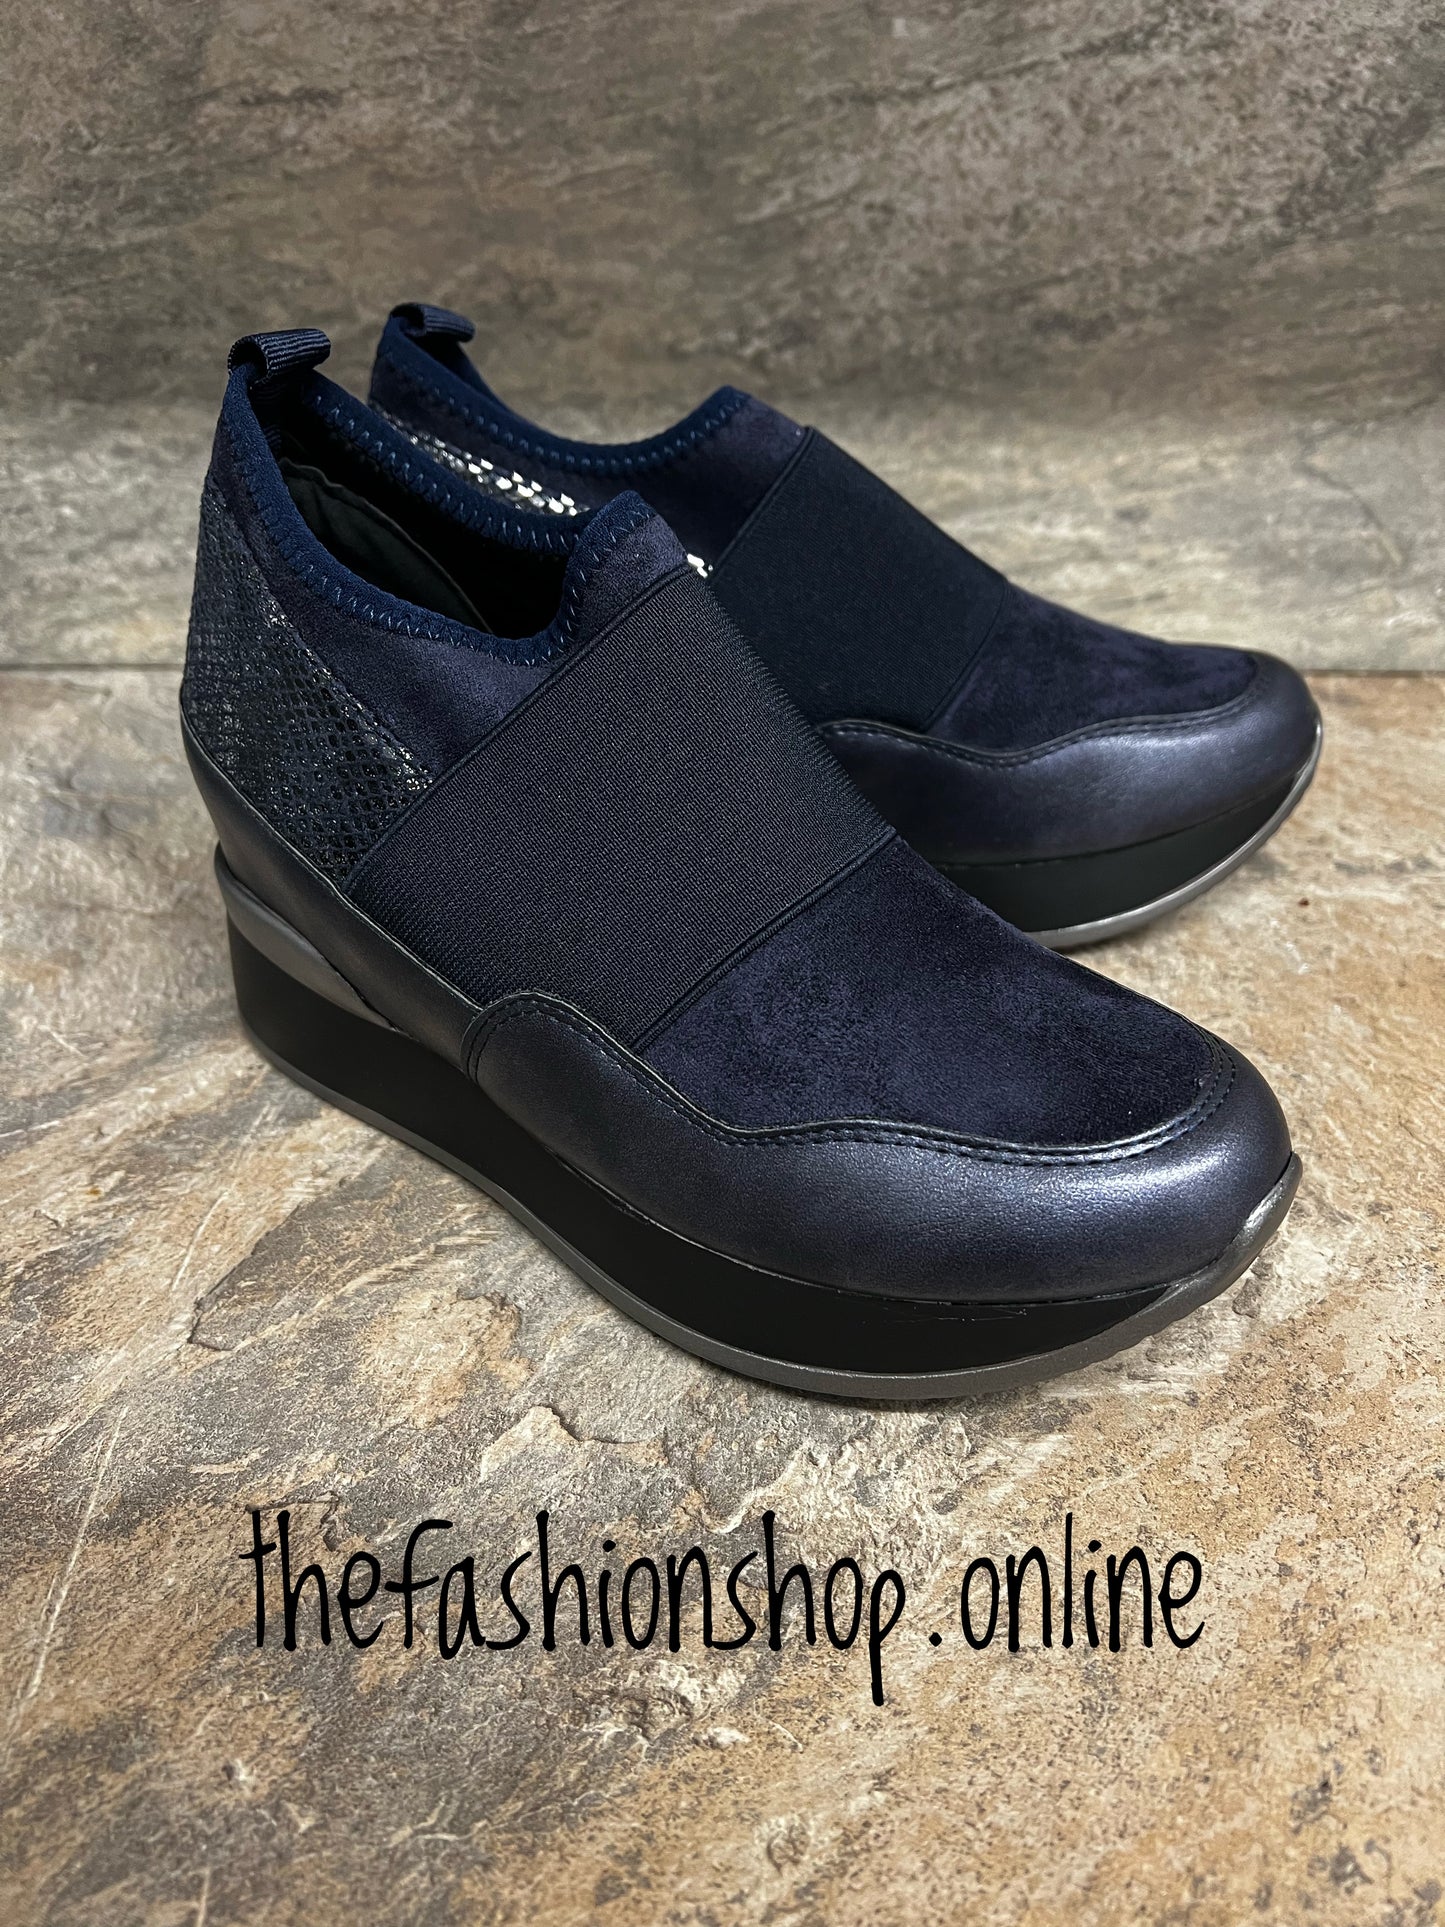 Navy and silver wedge slip on trainer